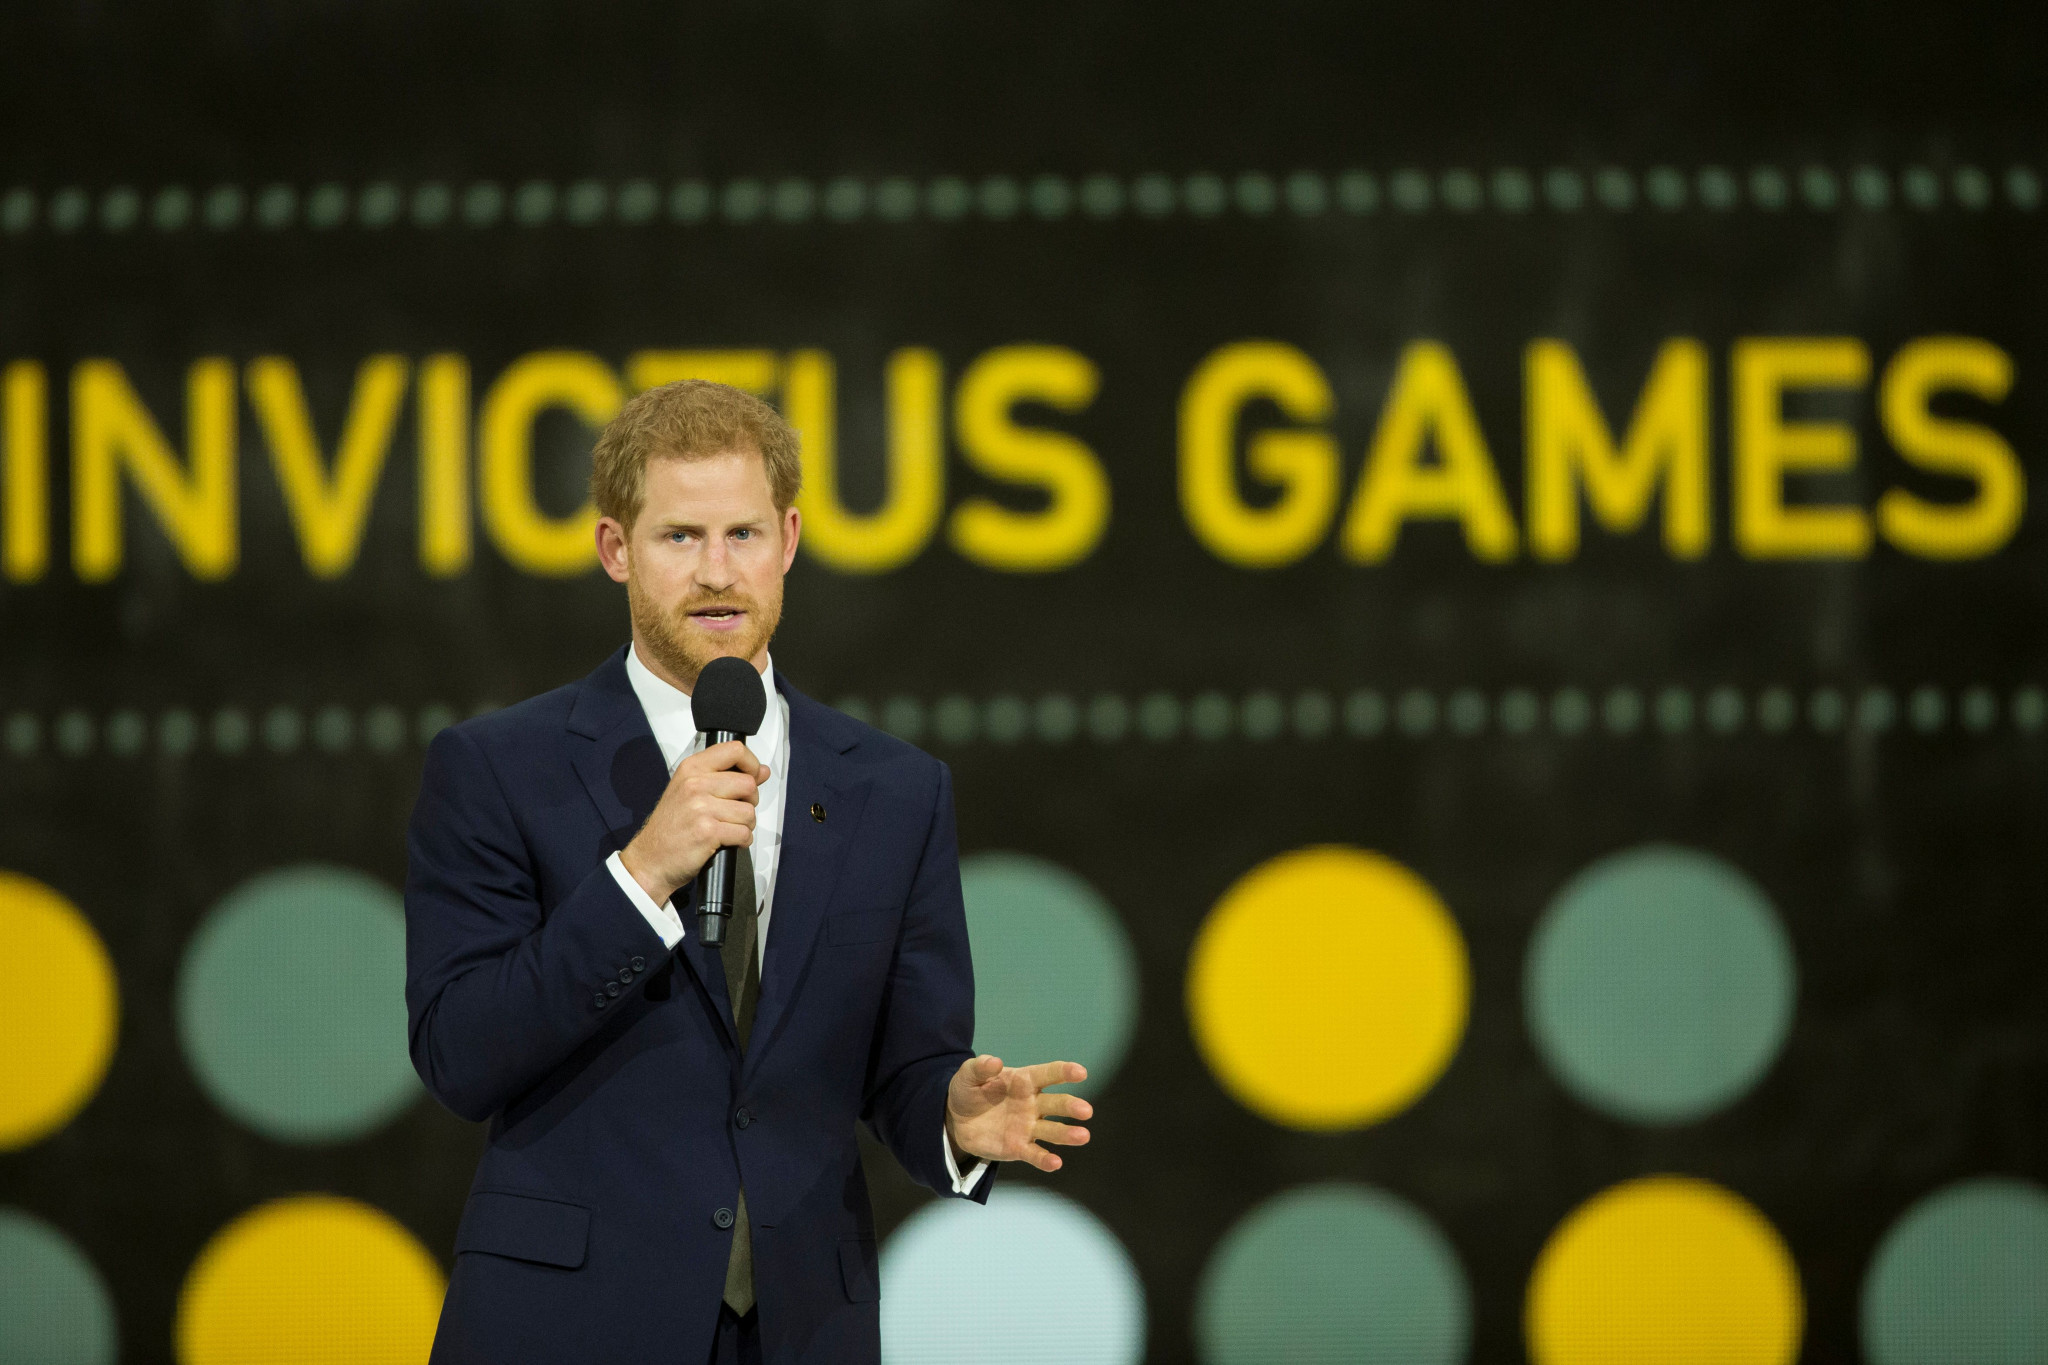 Prince Harry delivered an inspirational speech to athletes during the Opening Ceremony of the 2017 Invictus Games ©Getty Images